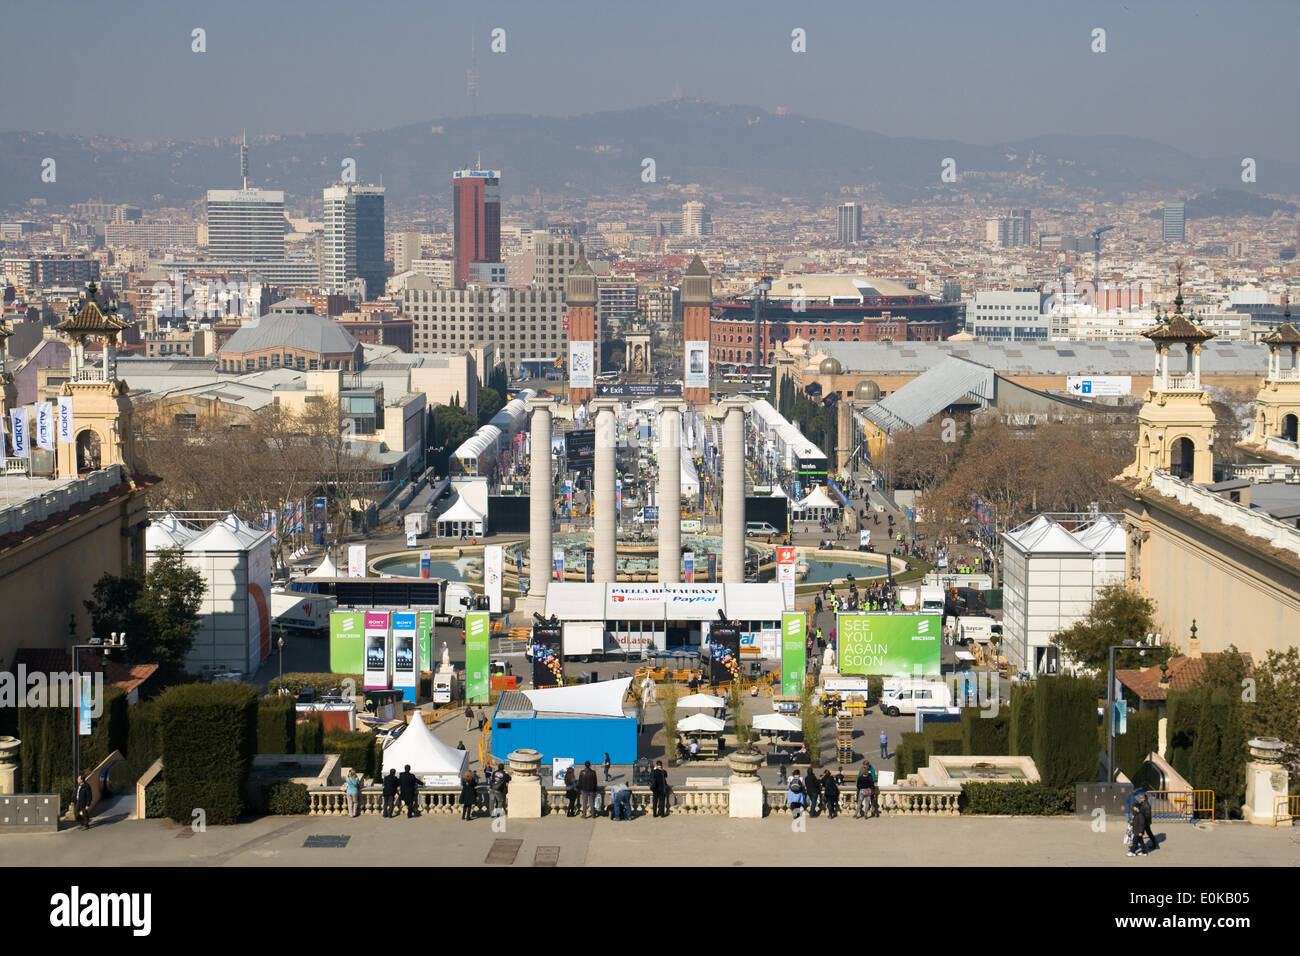 Images of the preparation of the Mobile World Congress 2012 in Barcelona one day before the start. Stock Photo